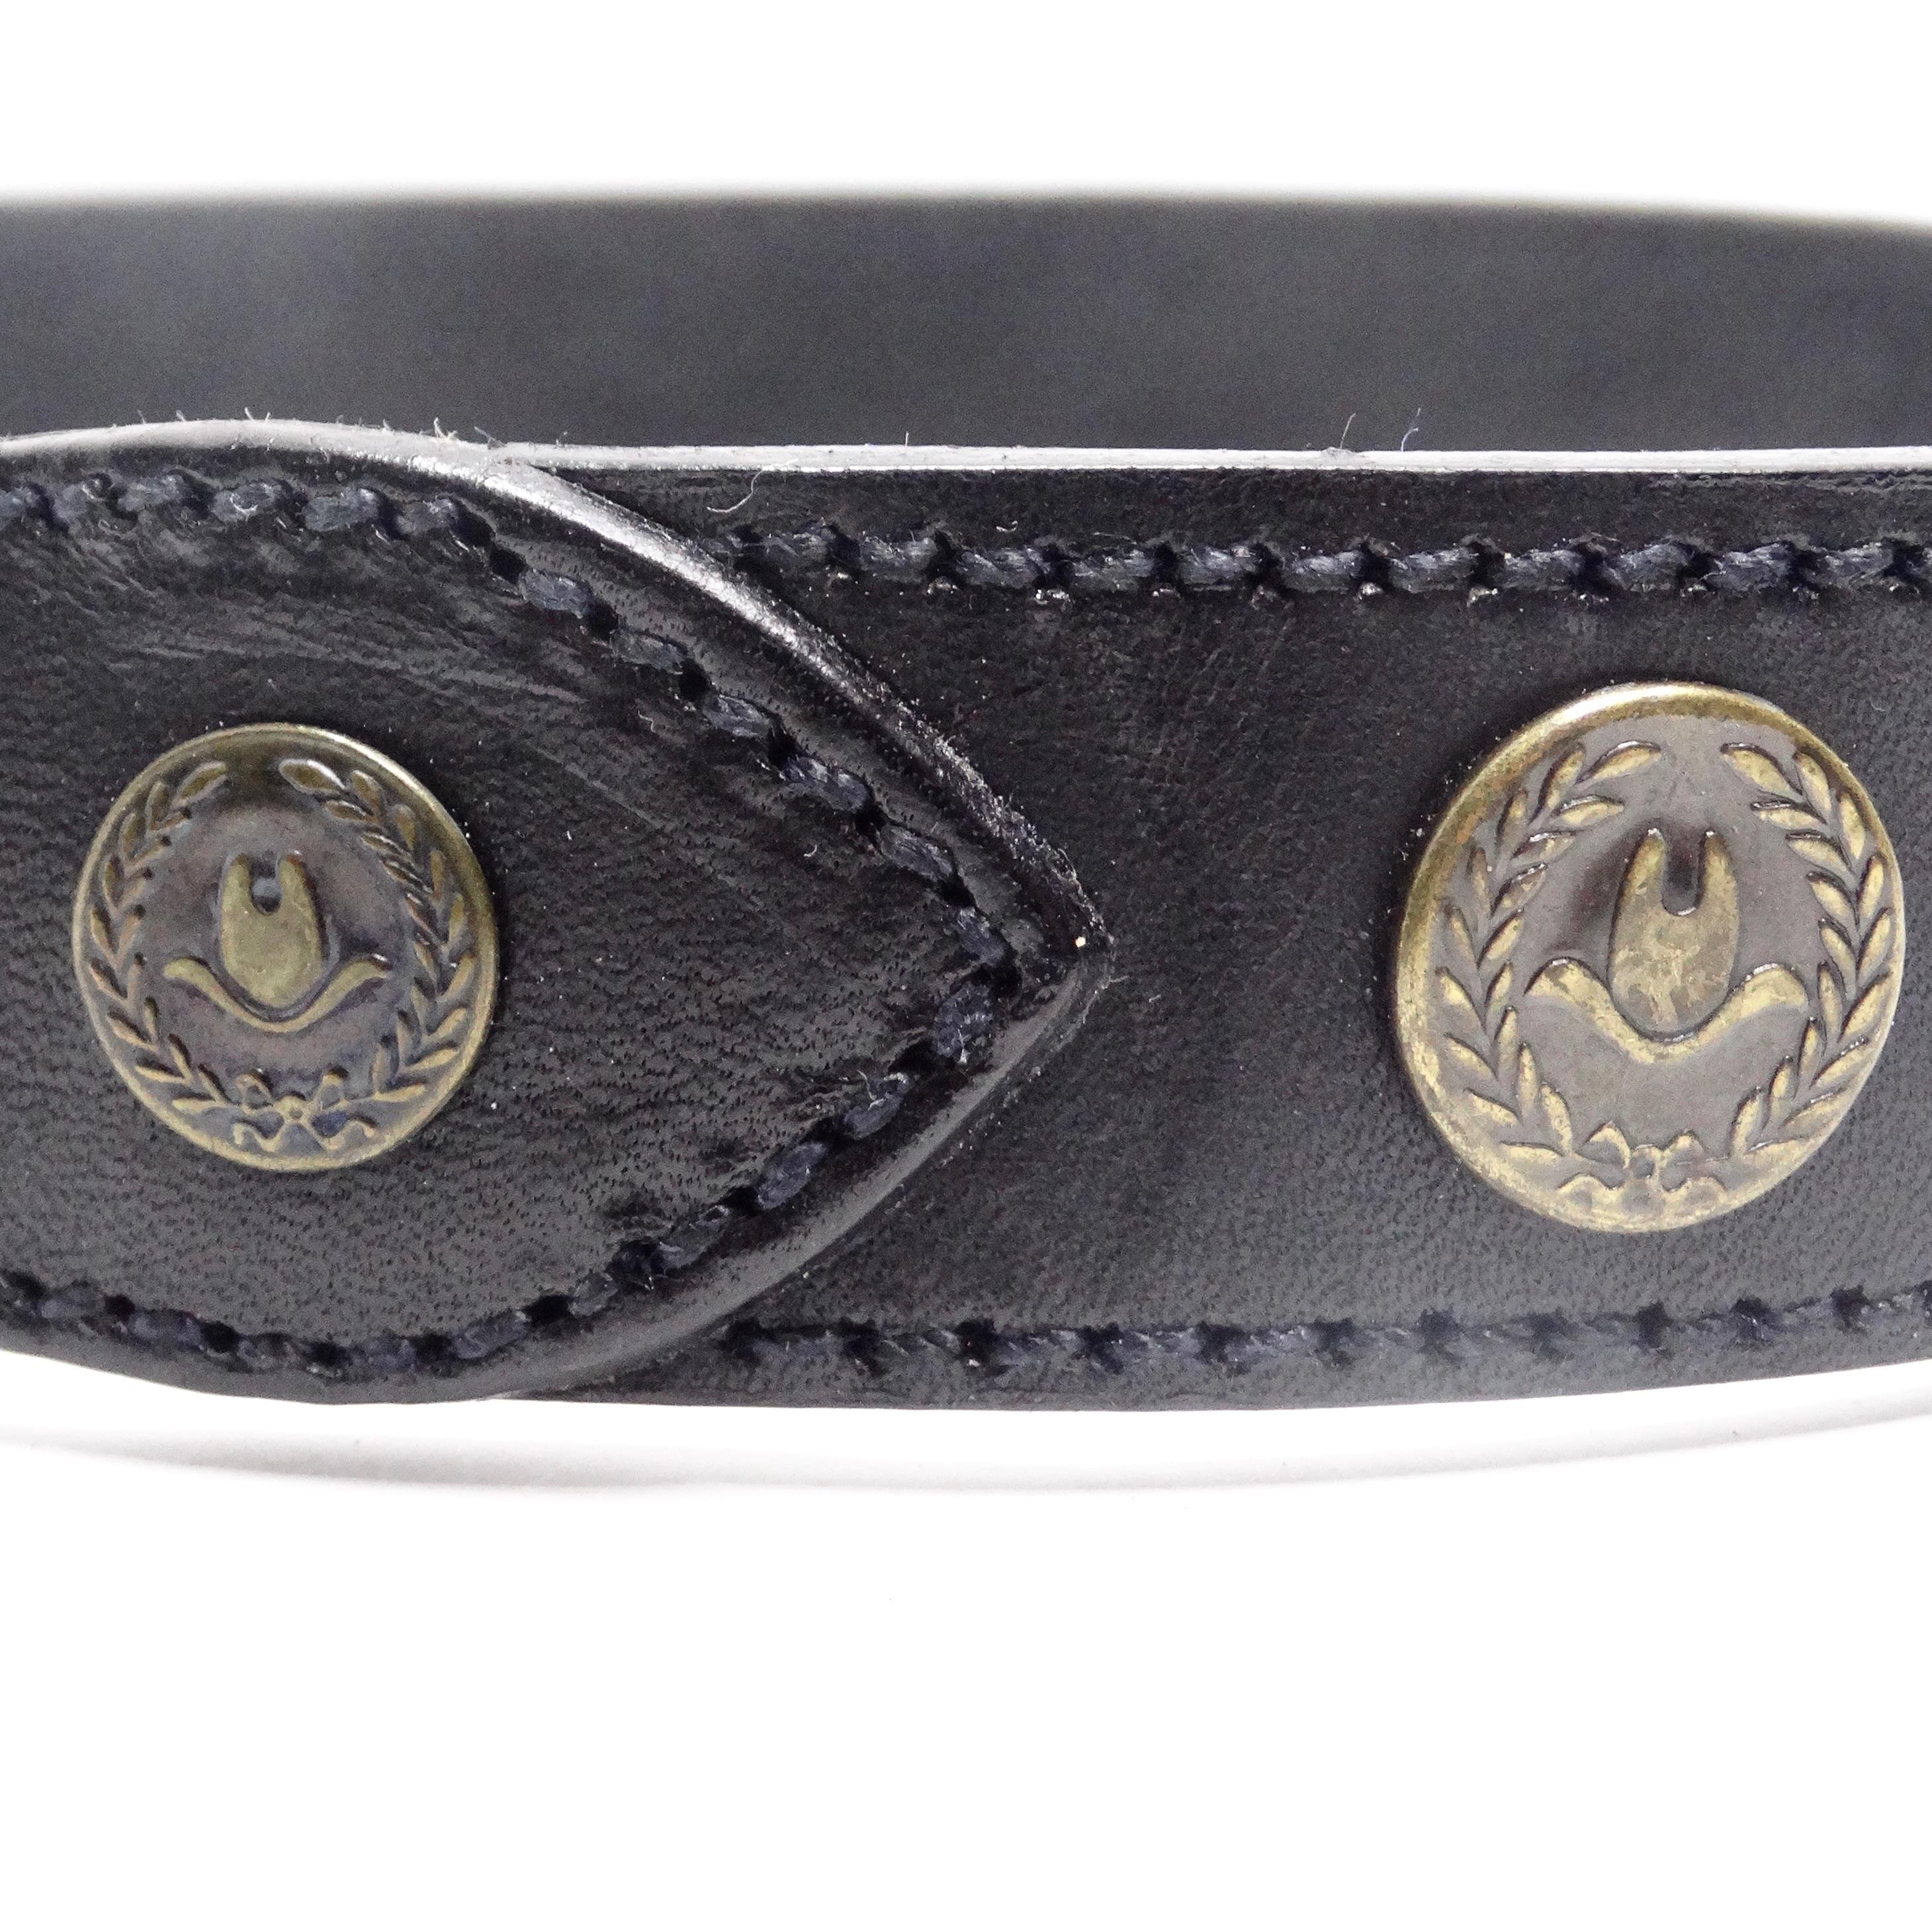 Moschino 1990s Black Leather Belt In Good Condition For Sale In Scottsdale, AZ